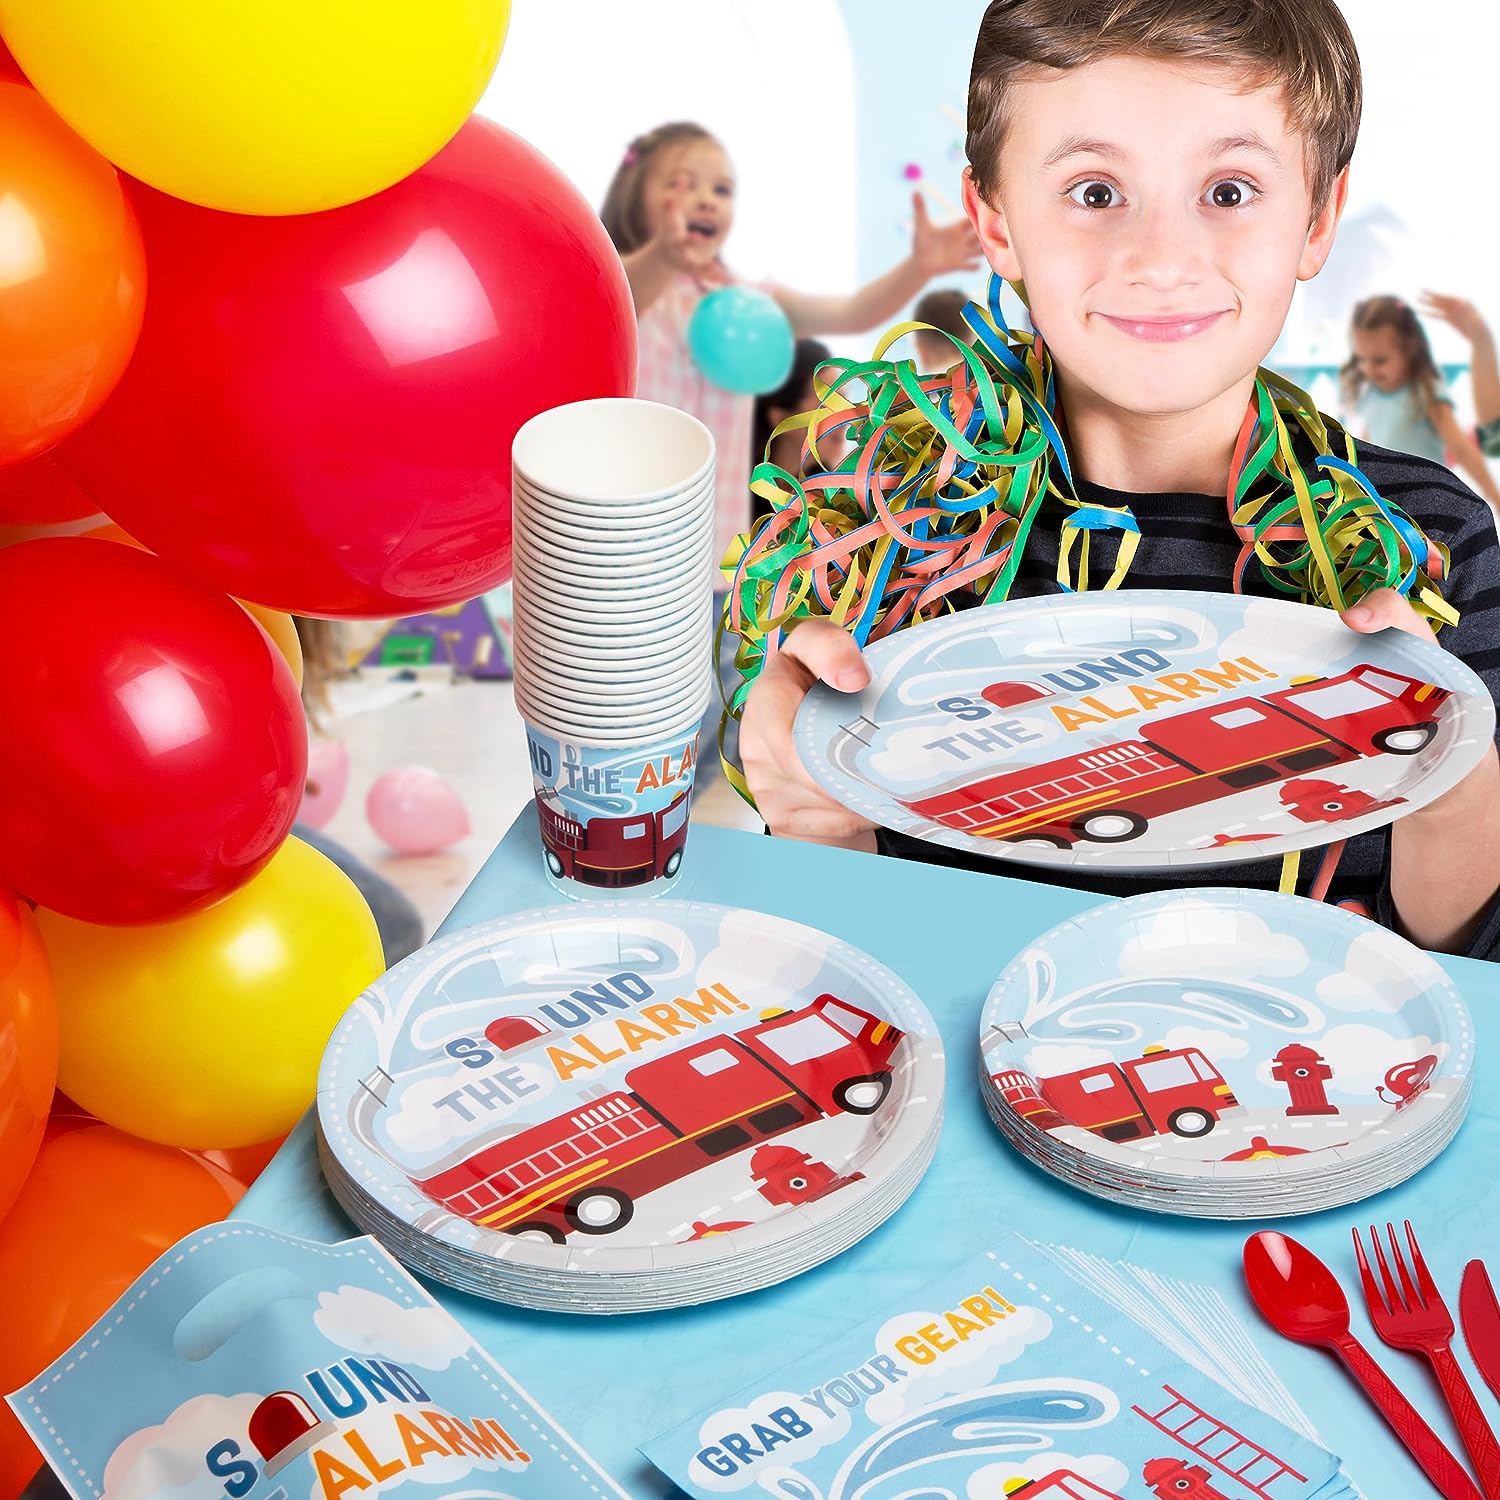 All-In-One 357 Pc Fire Truck Birthday Party Supplies (Serves 24) Firetruck Birthday Decorations with Plates, Cups, Napkins, Tablecloth, Balloons, Cake Topper and More Firefighter Decorations